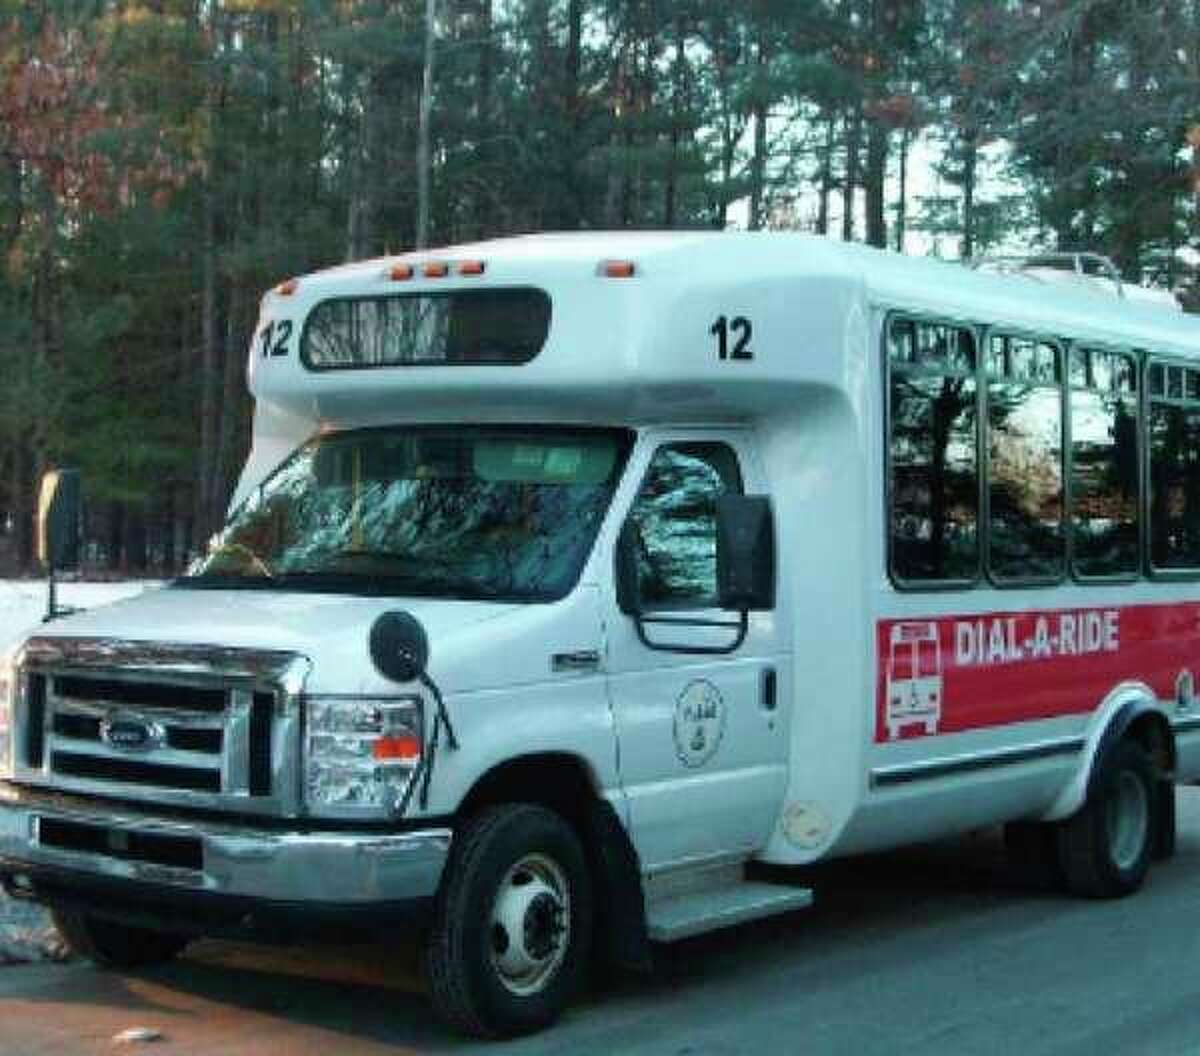 Dial-A-Ride is a form of public transportation operated by the City of Midland.